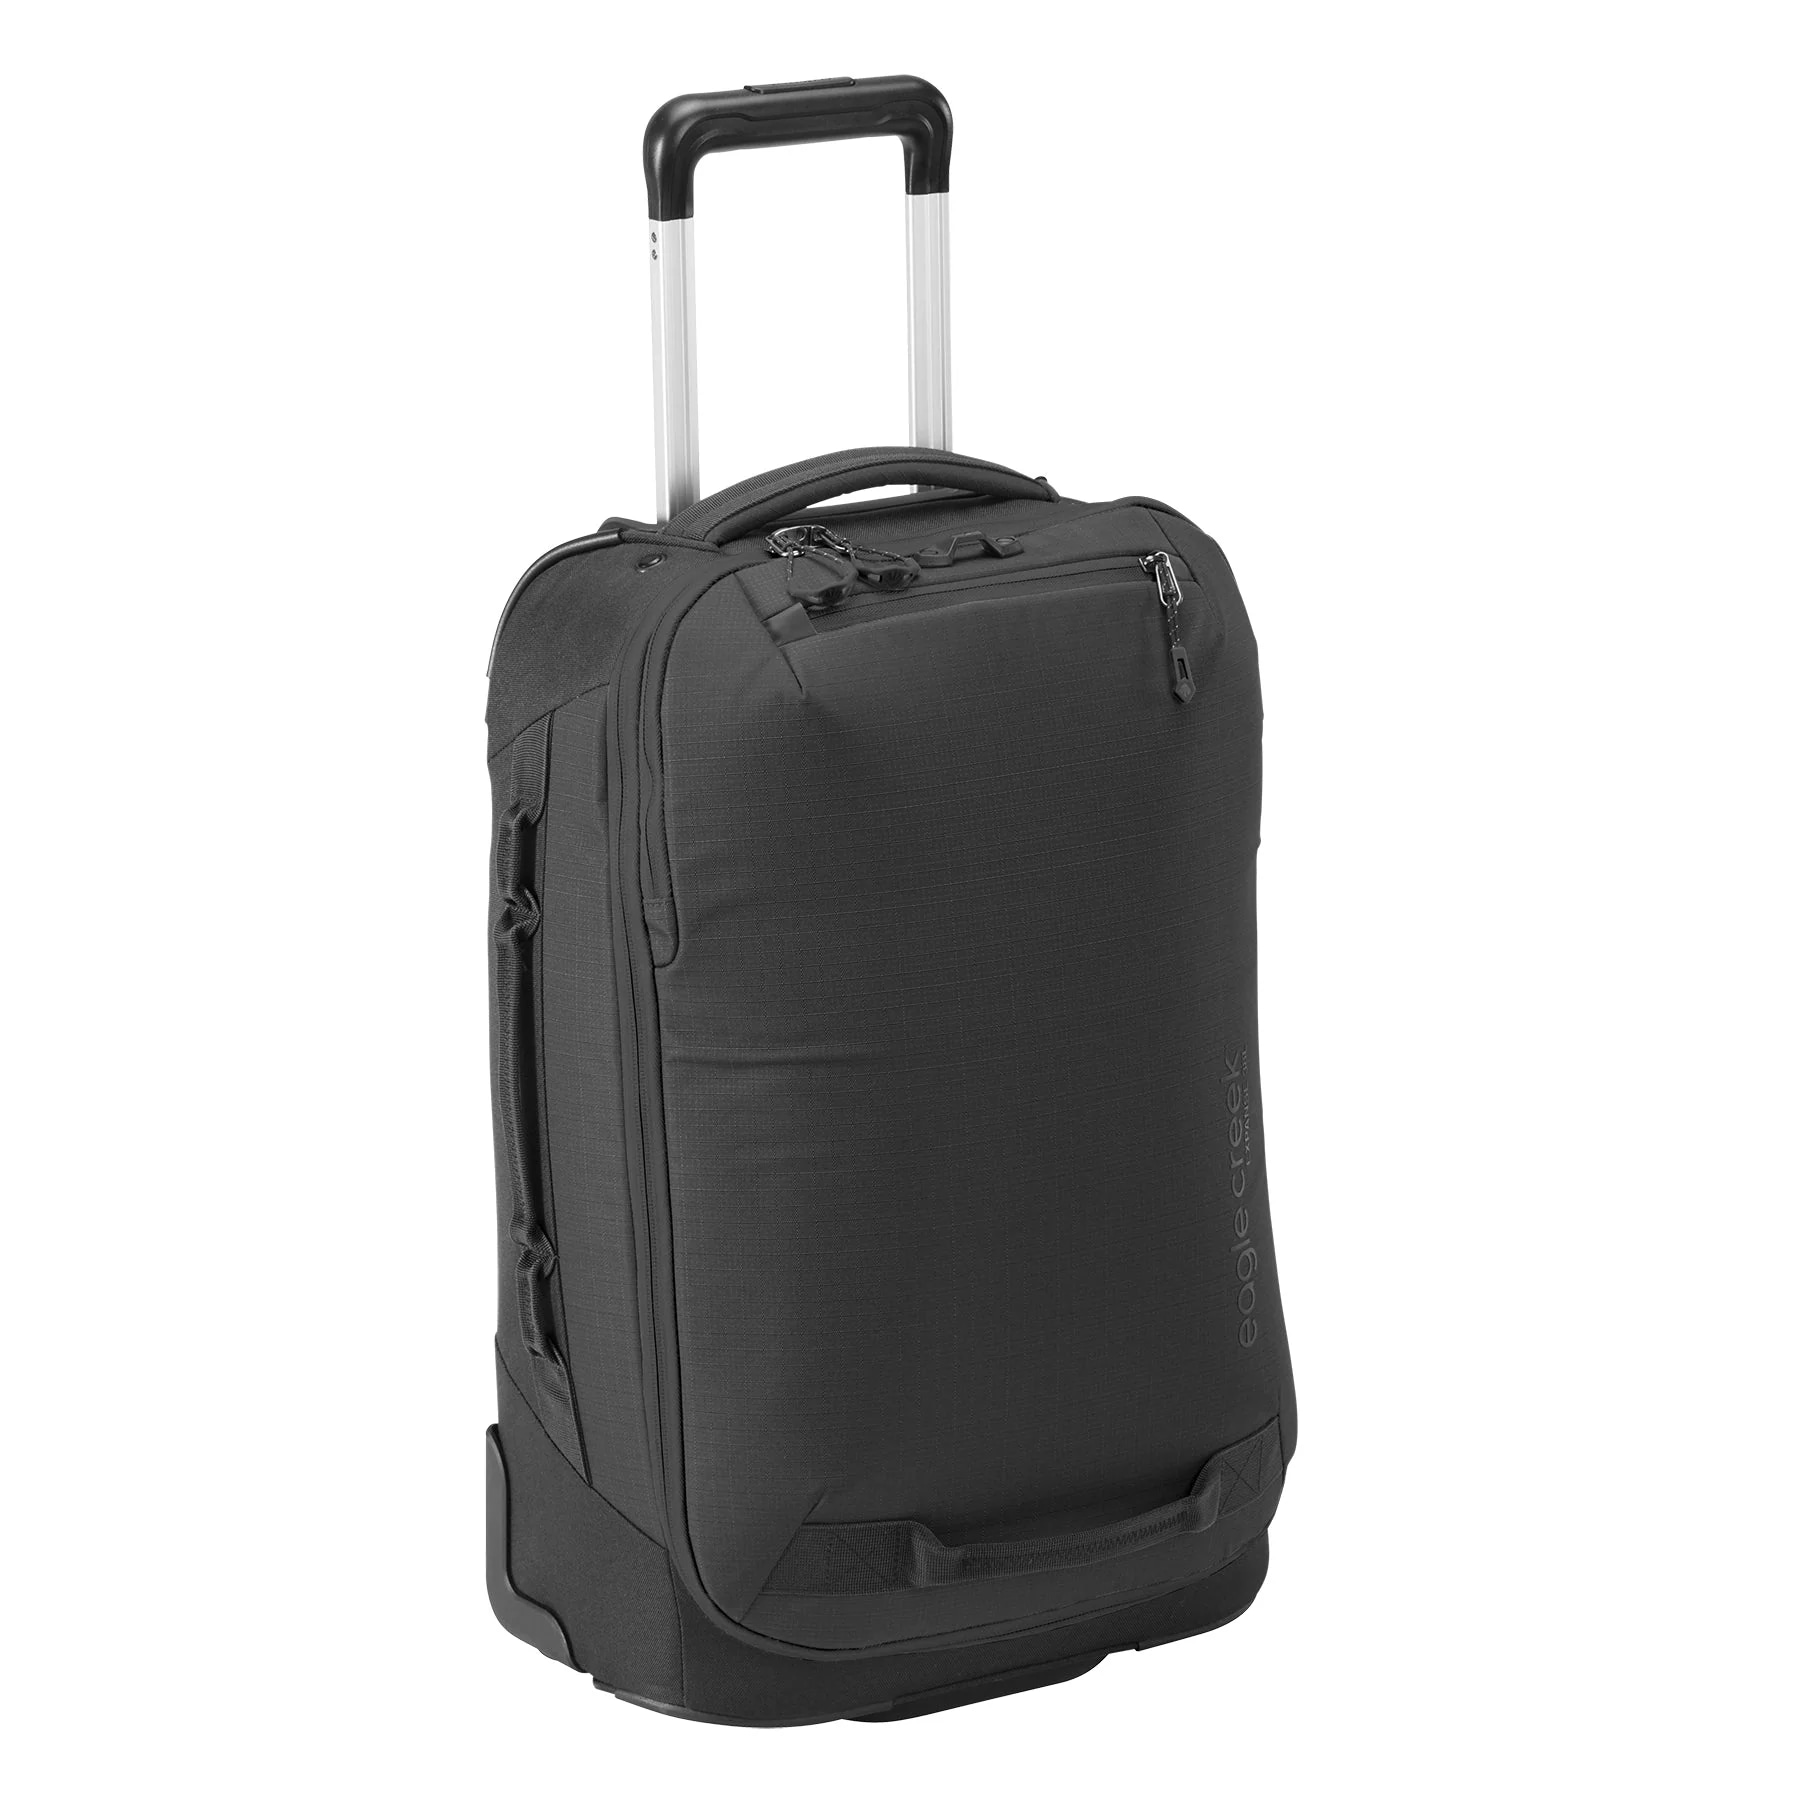 Expanse 2-Wheel Convertible International Carry-On Luggage